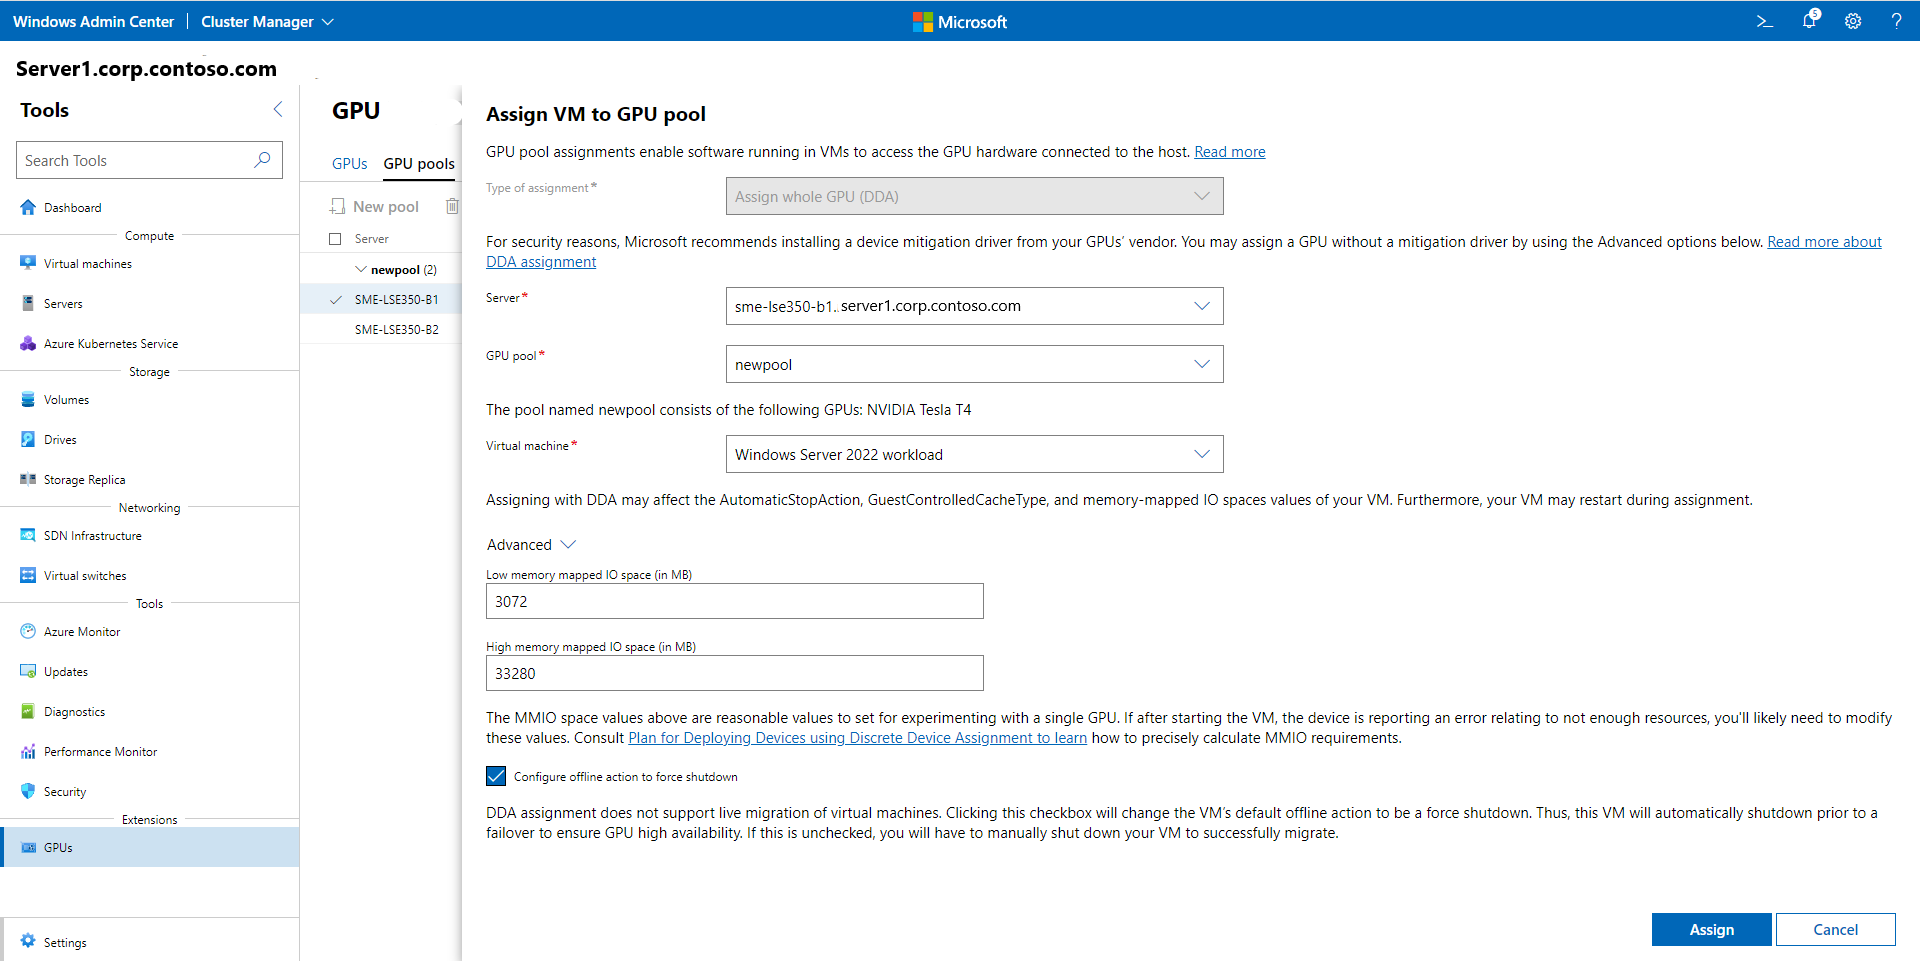 Screenshot of the Assign VM to GPU pool page in Windows Admin Center where you assign a VM to a GPU from the GPU pool